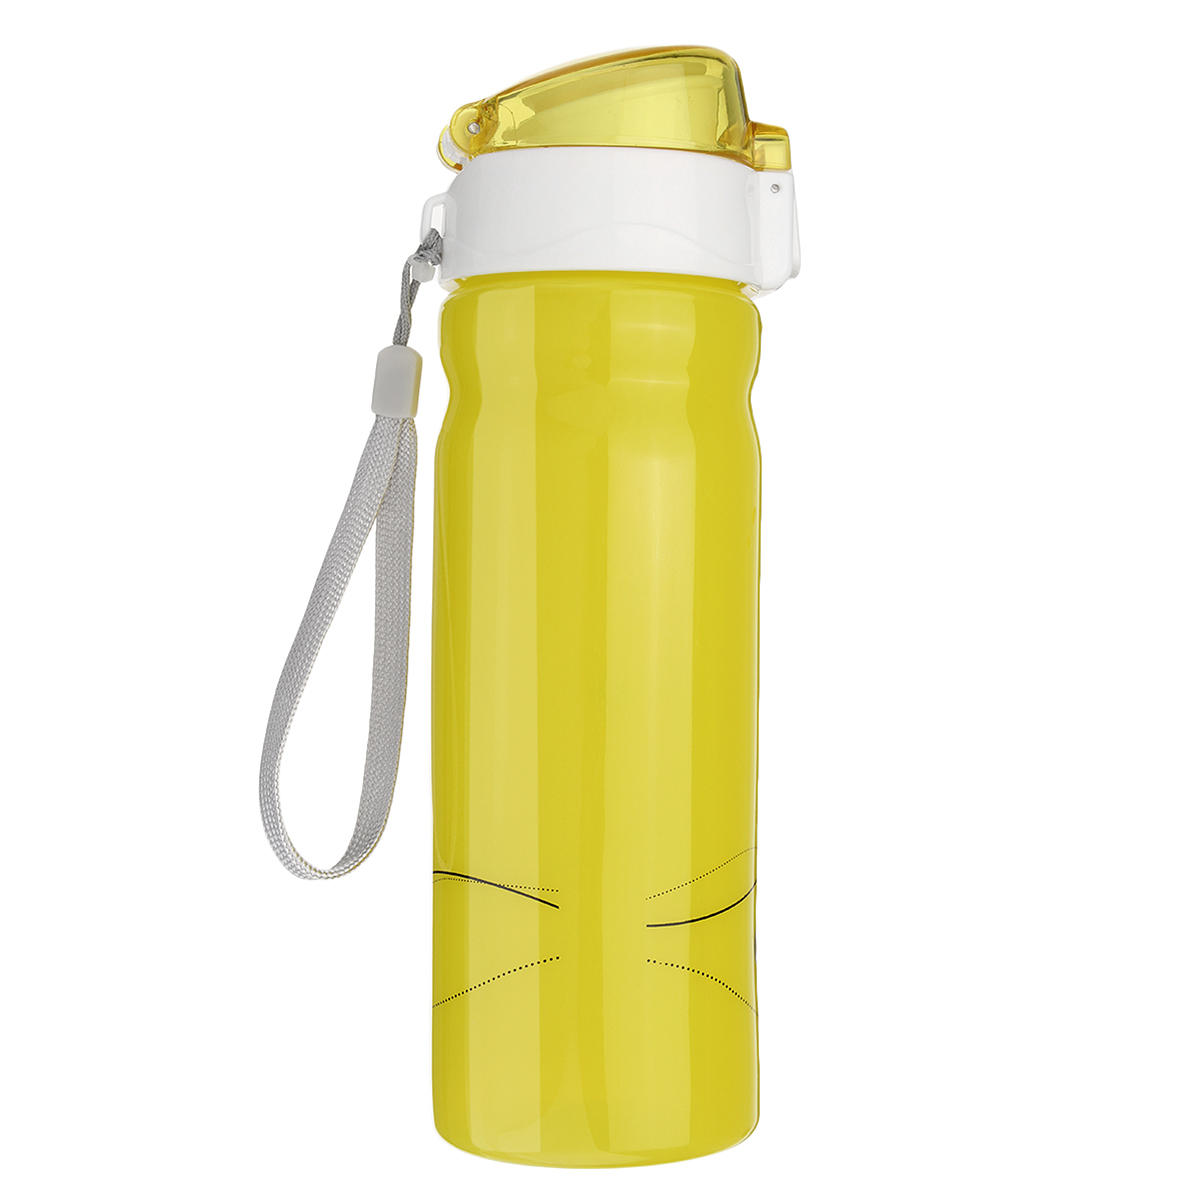 600ml20oz-High-quality-Food-Grade-Water-Bottle-for-long-hikes-trekking-hot-yoga-class-long-load-trip-1523049-11